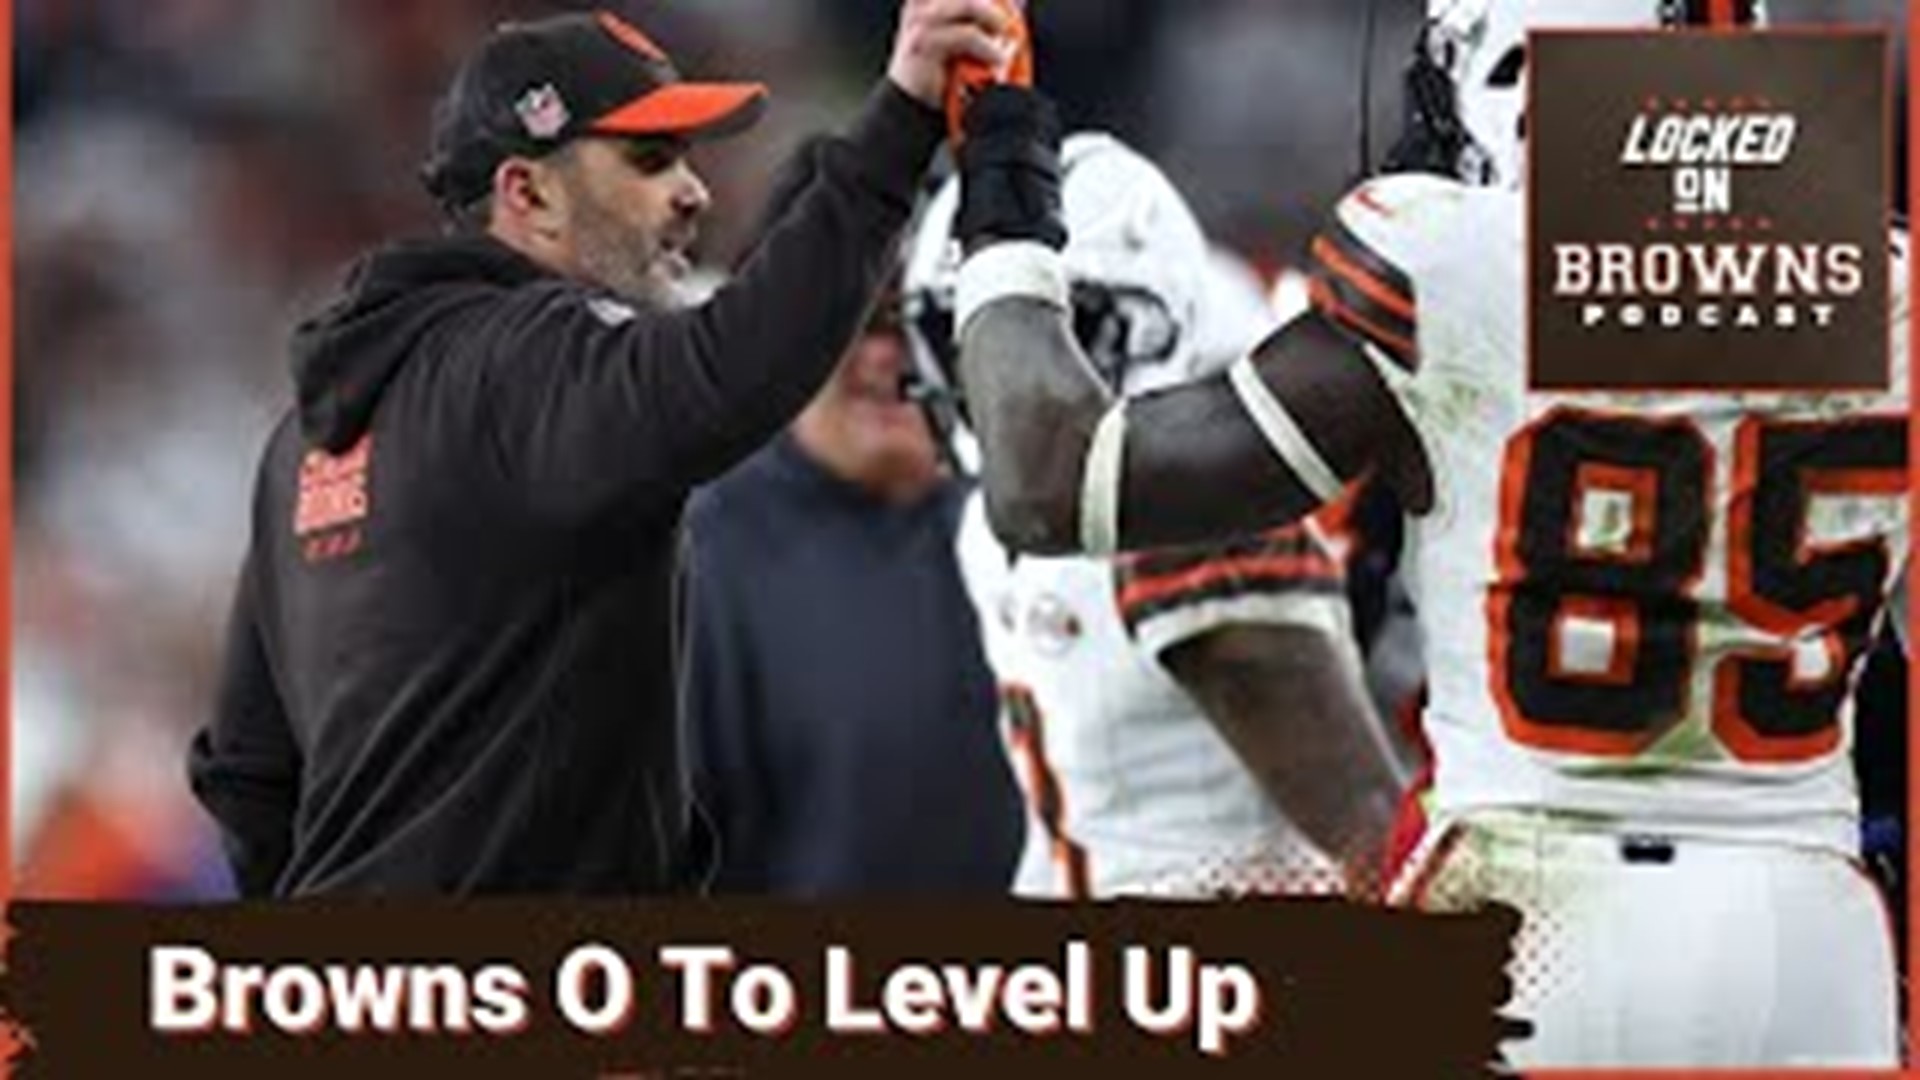 The OBR's Ian Wharton joins, we chat on the Browns offense finding a way to run through Deshaun Watson the way it did it through Joe Flacco.